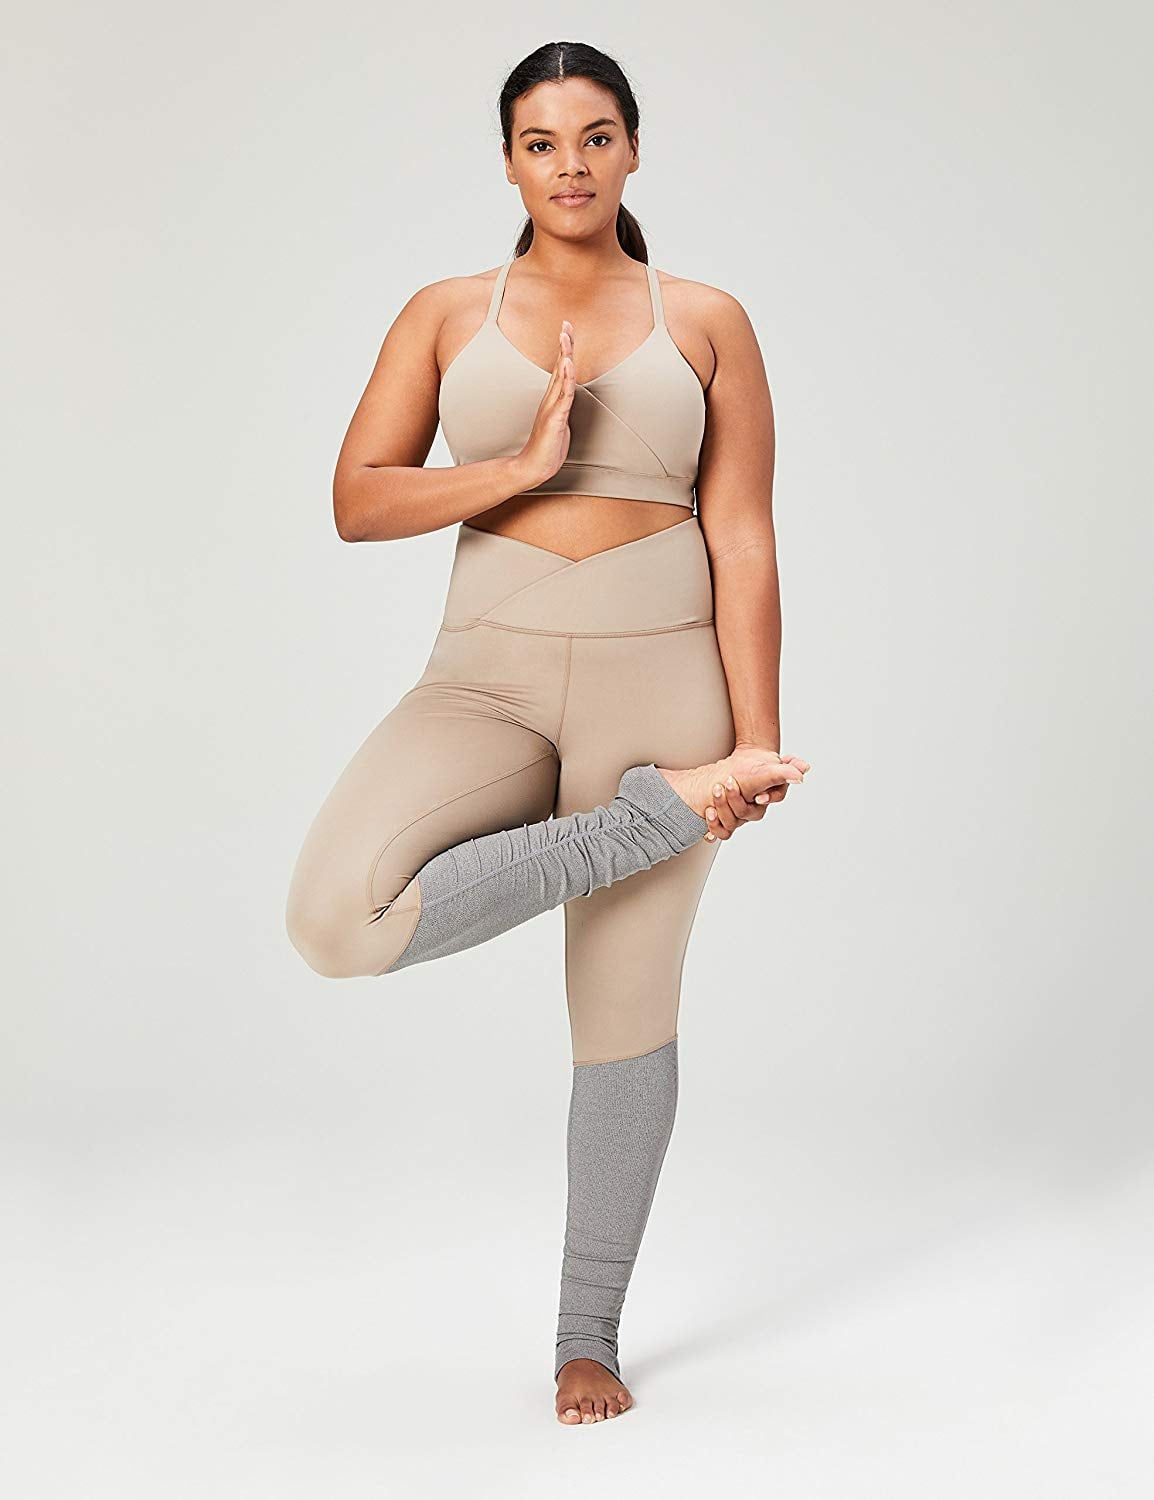 best workout tops for plus size